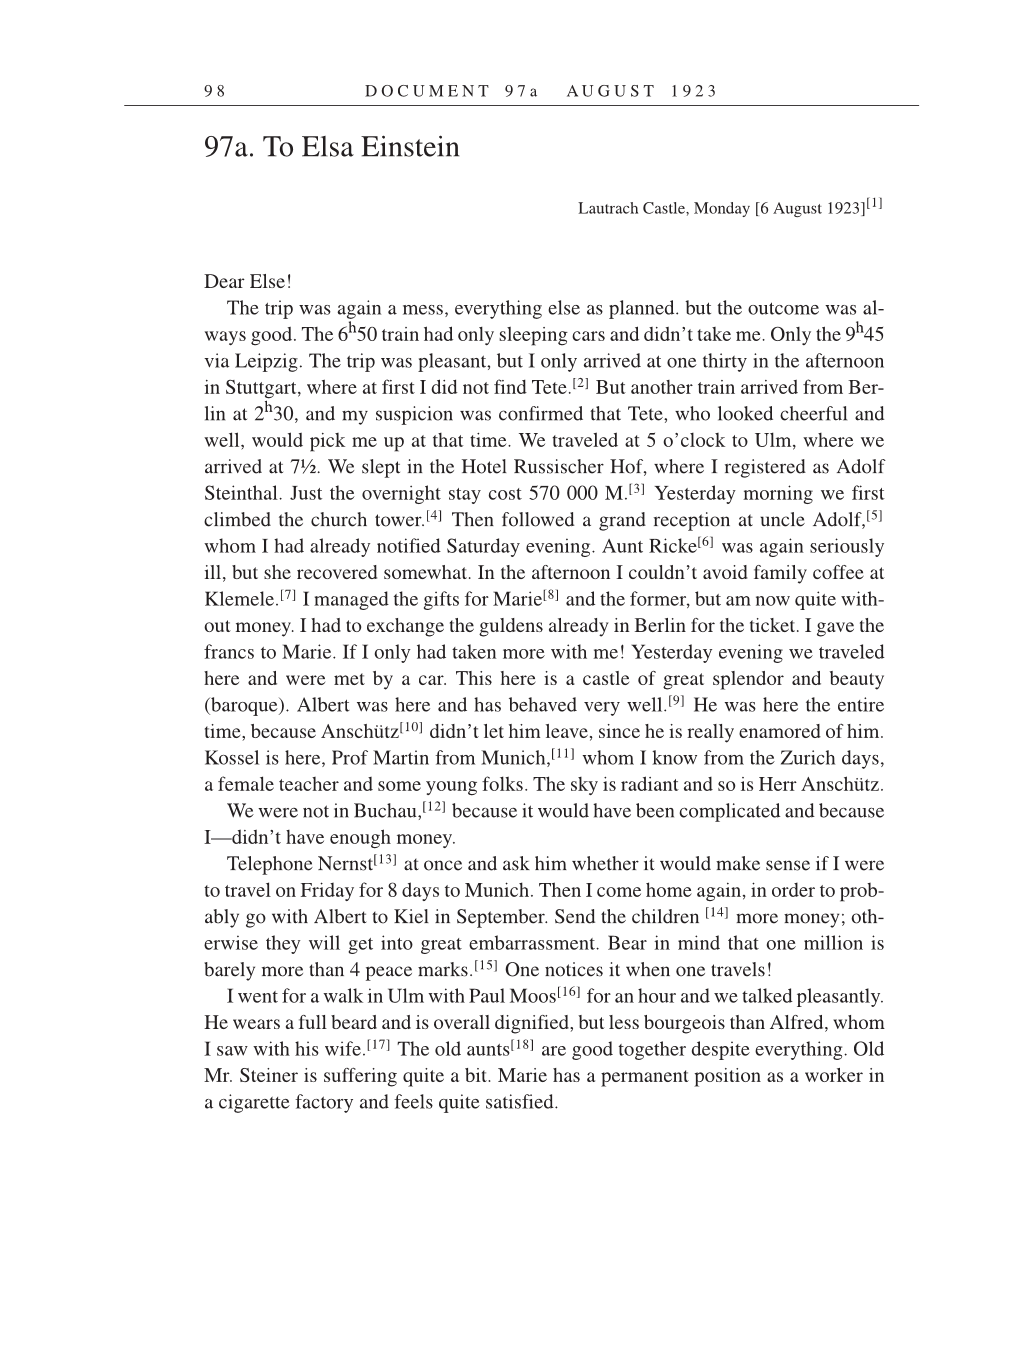 Volume 14: The Berlin Years: Writings & Correspondence, April 1923-May 1925 (English Translation Supplement) page 98